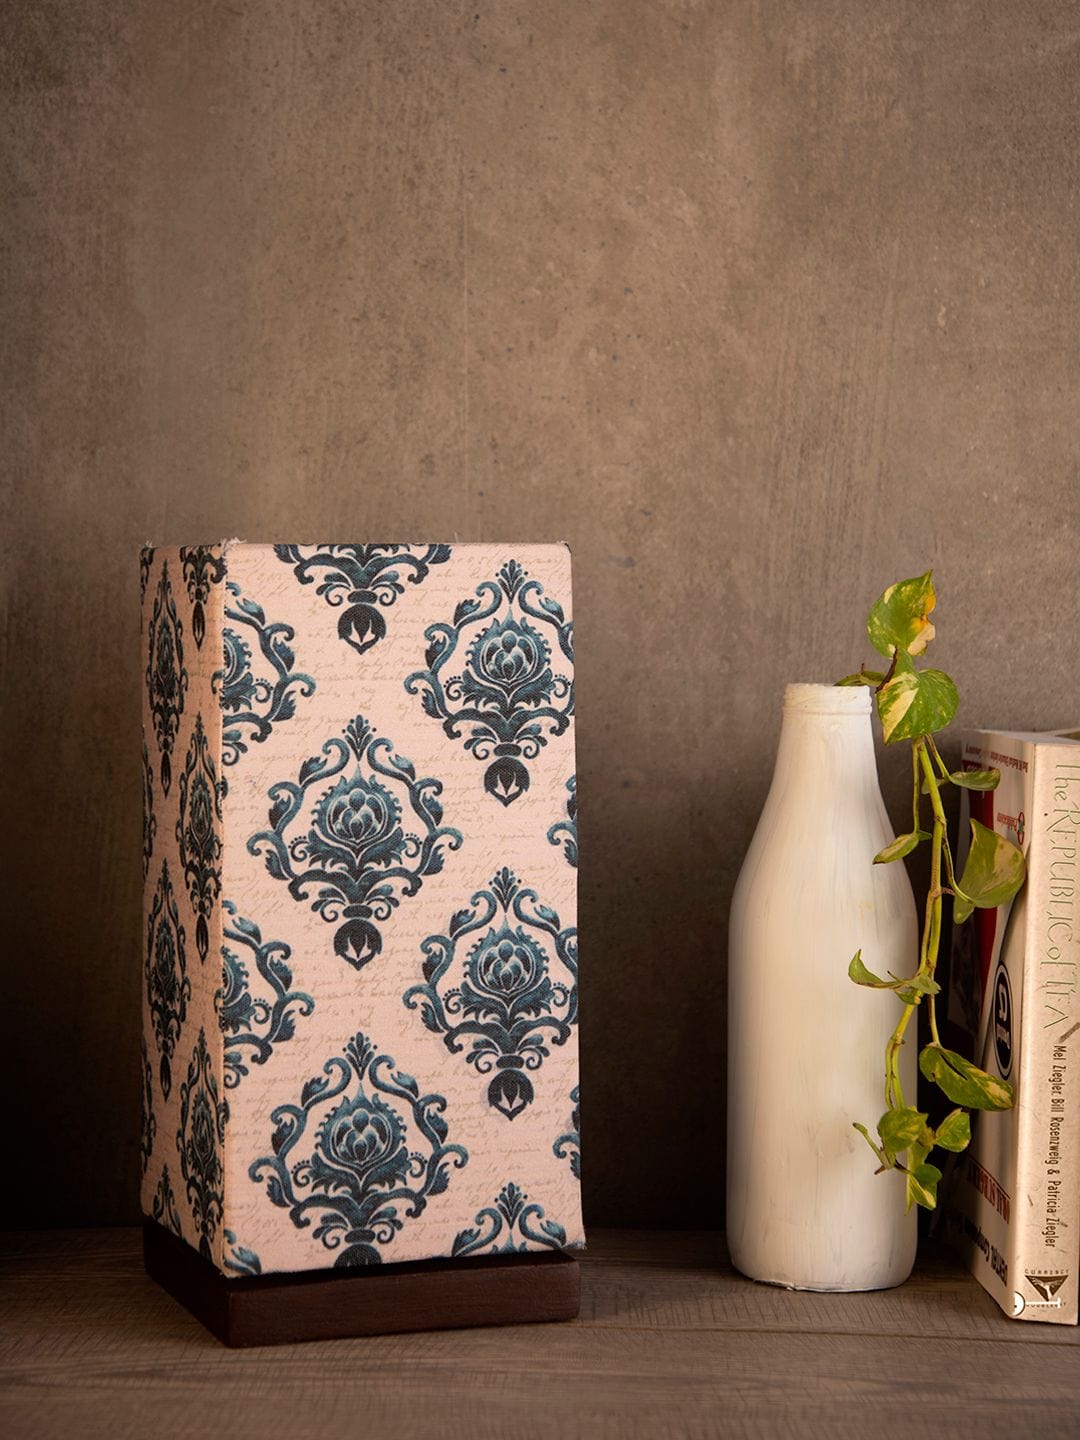 Block Print Lamp with Wooden Base